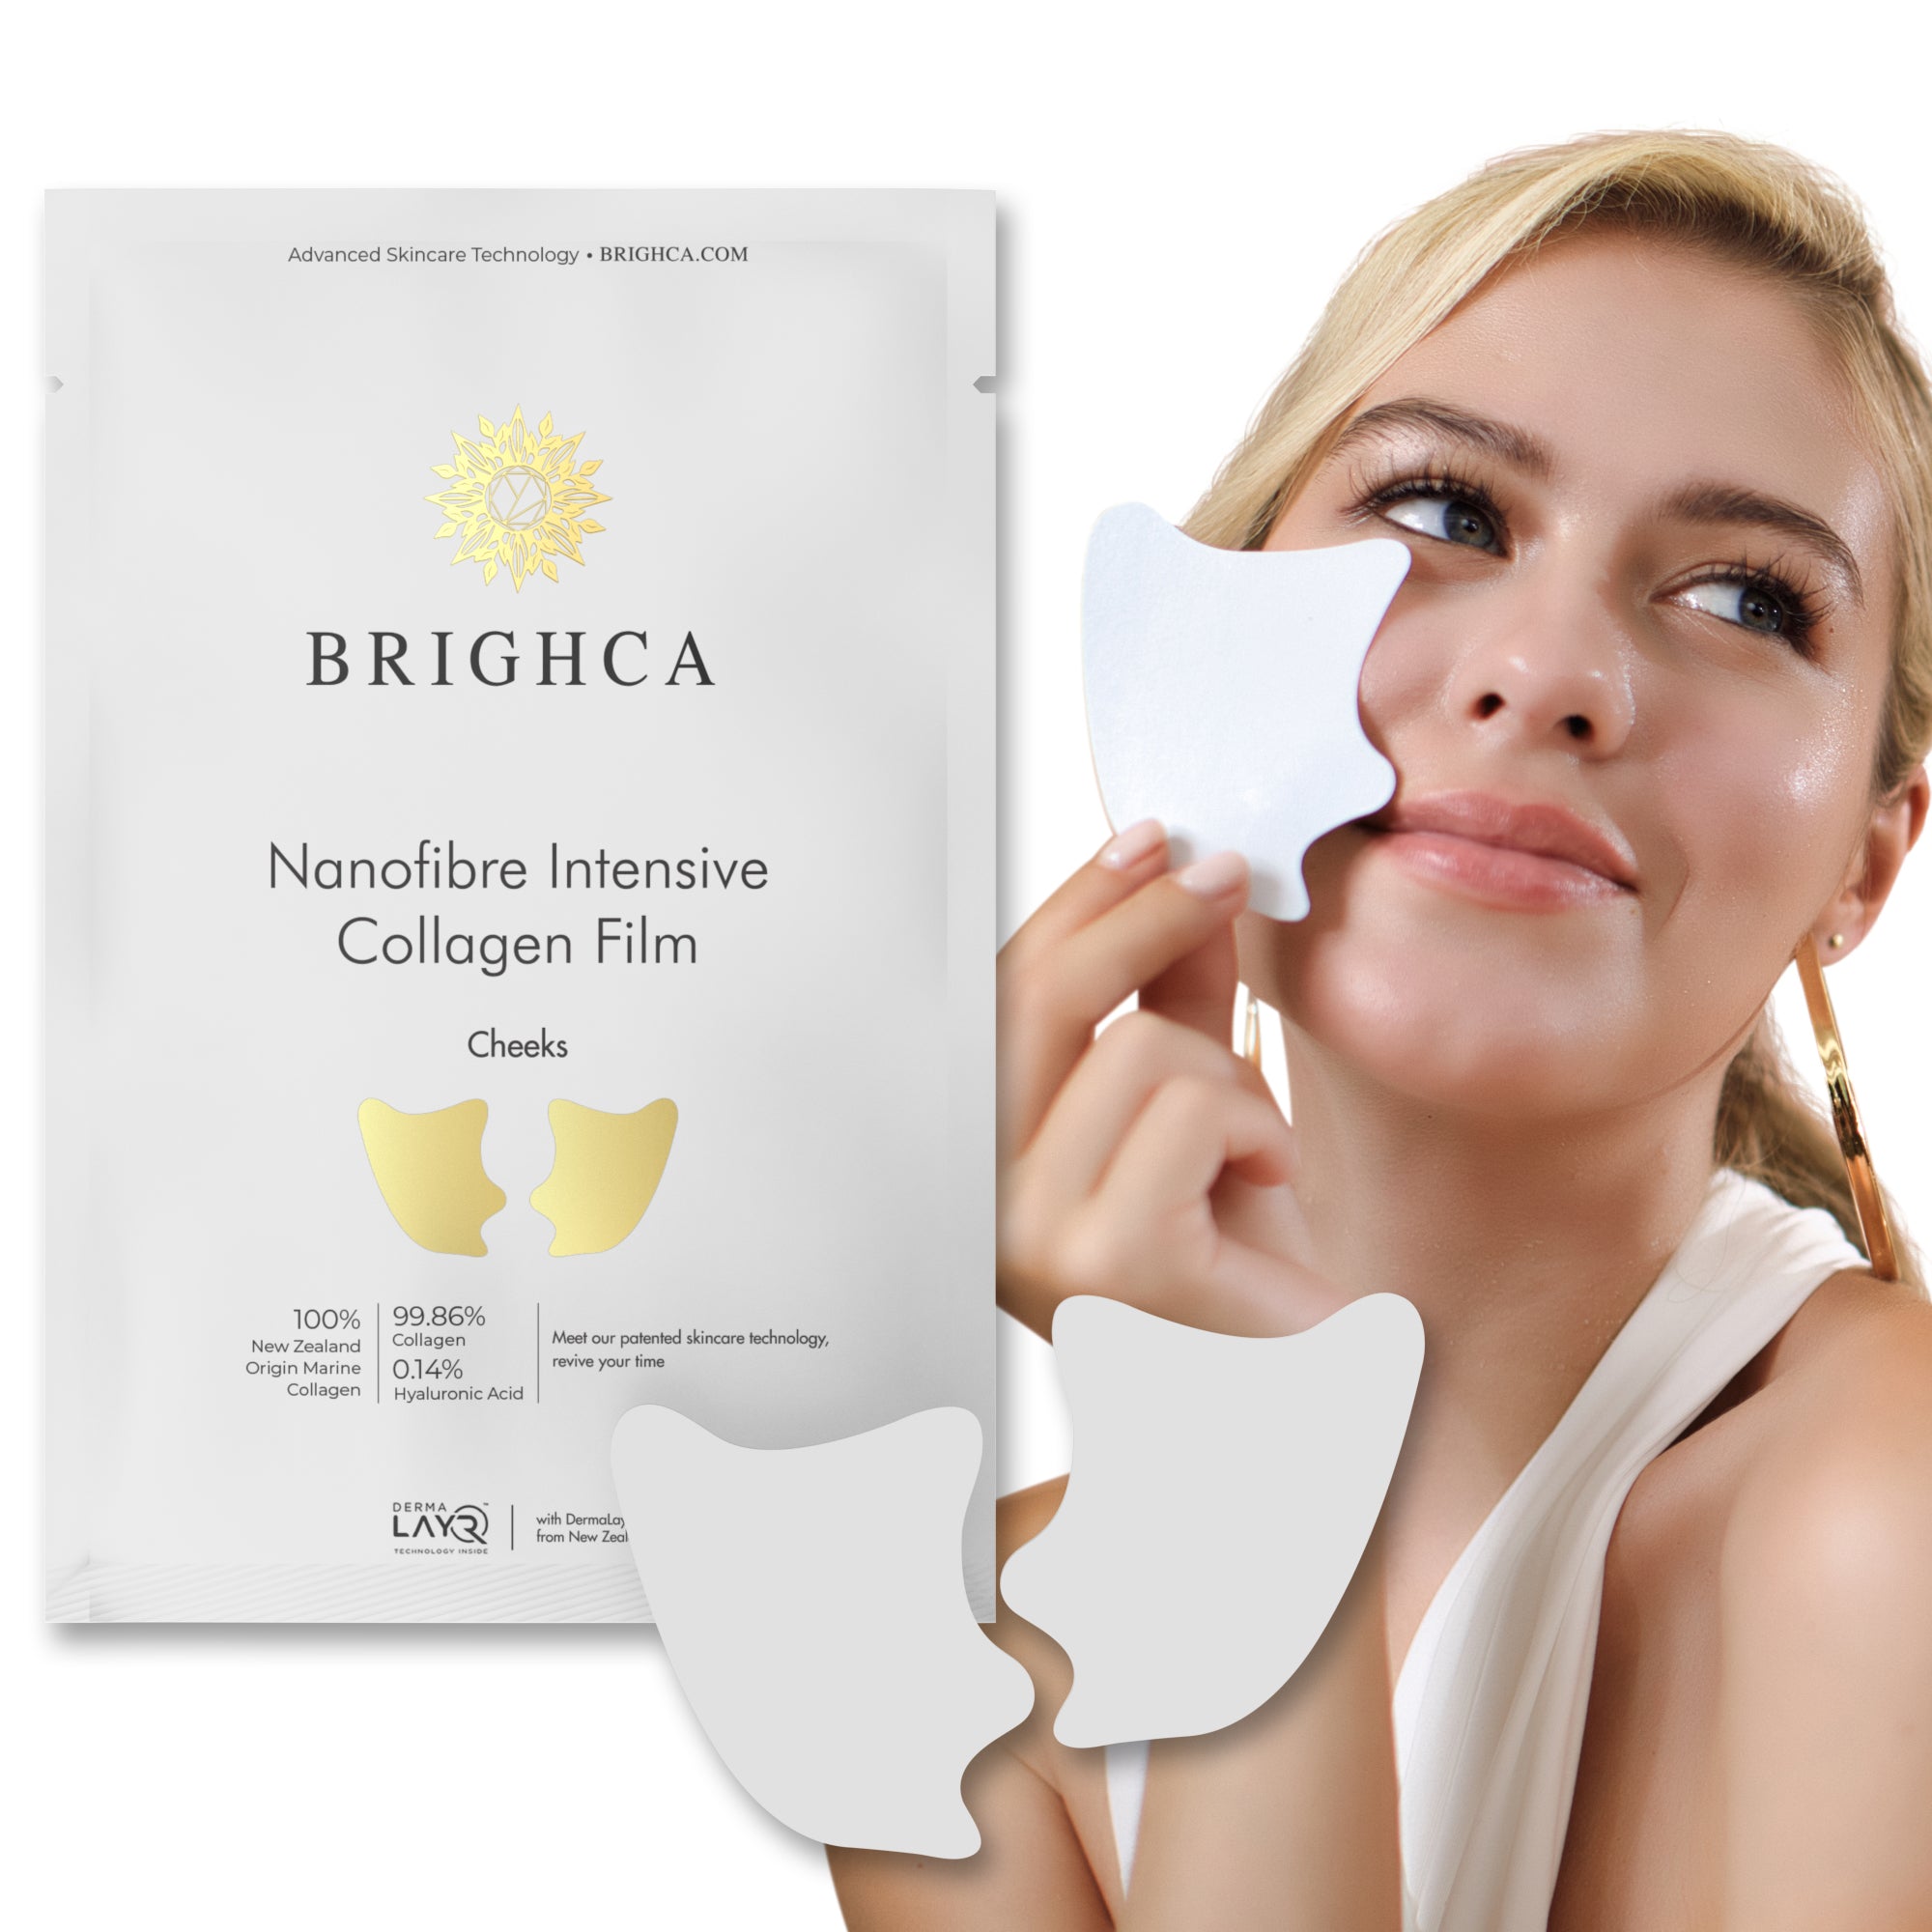 Melting Nanofiber Collagen Film Face Treatment Brighca for anti-aging, lifting, firming, hydrating